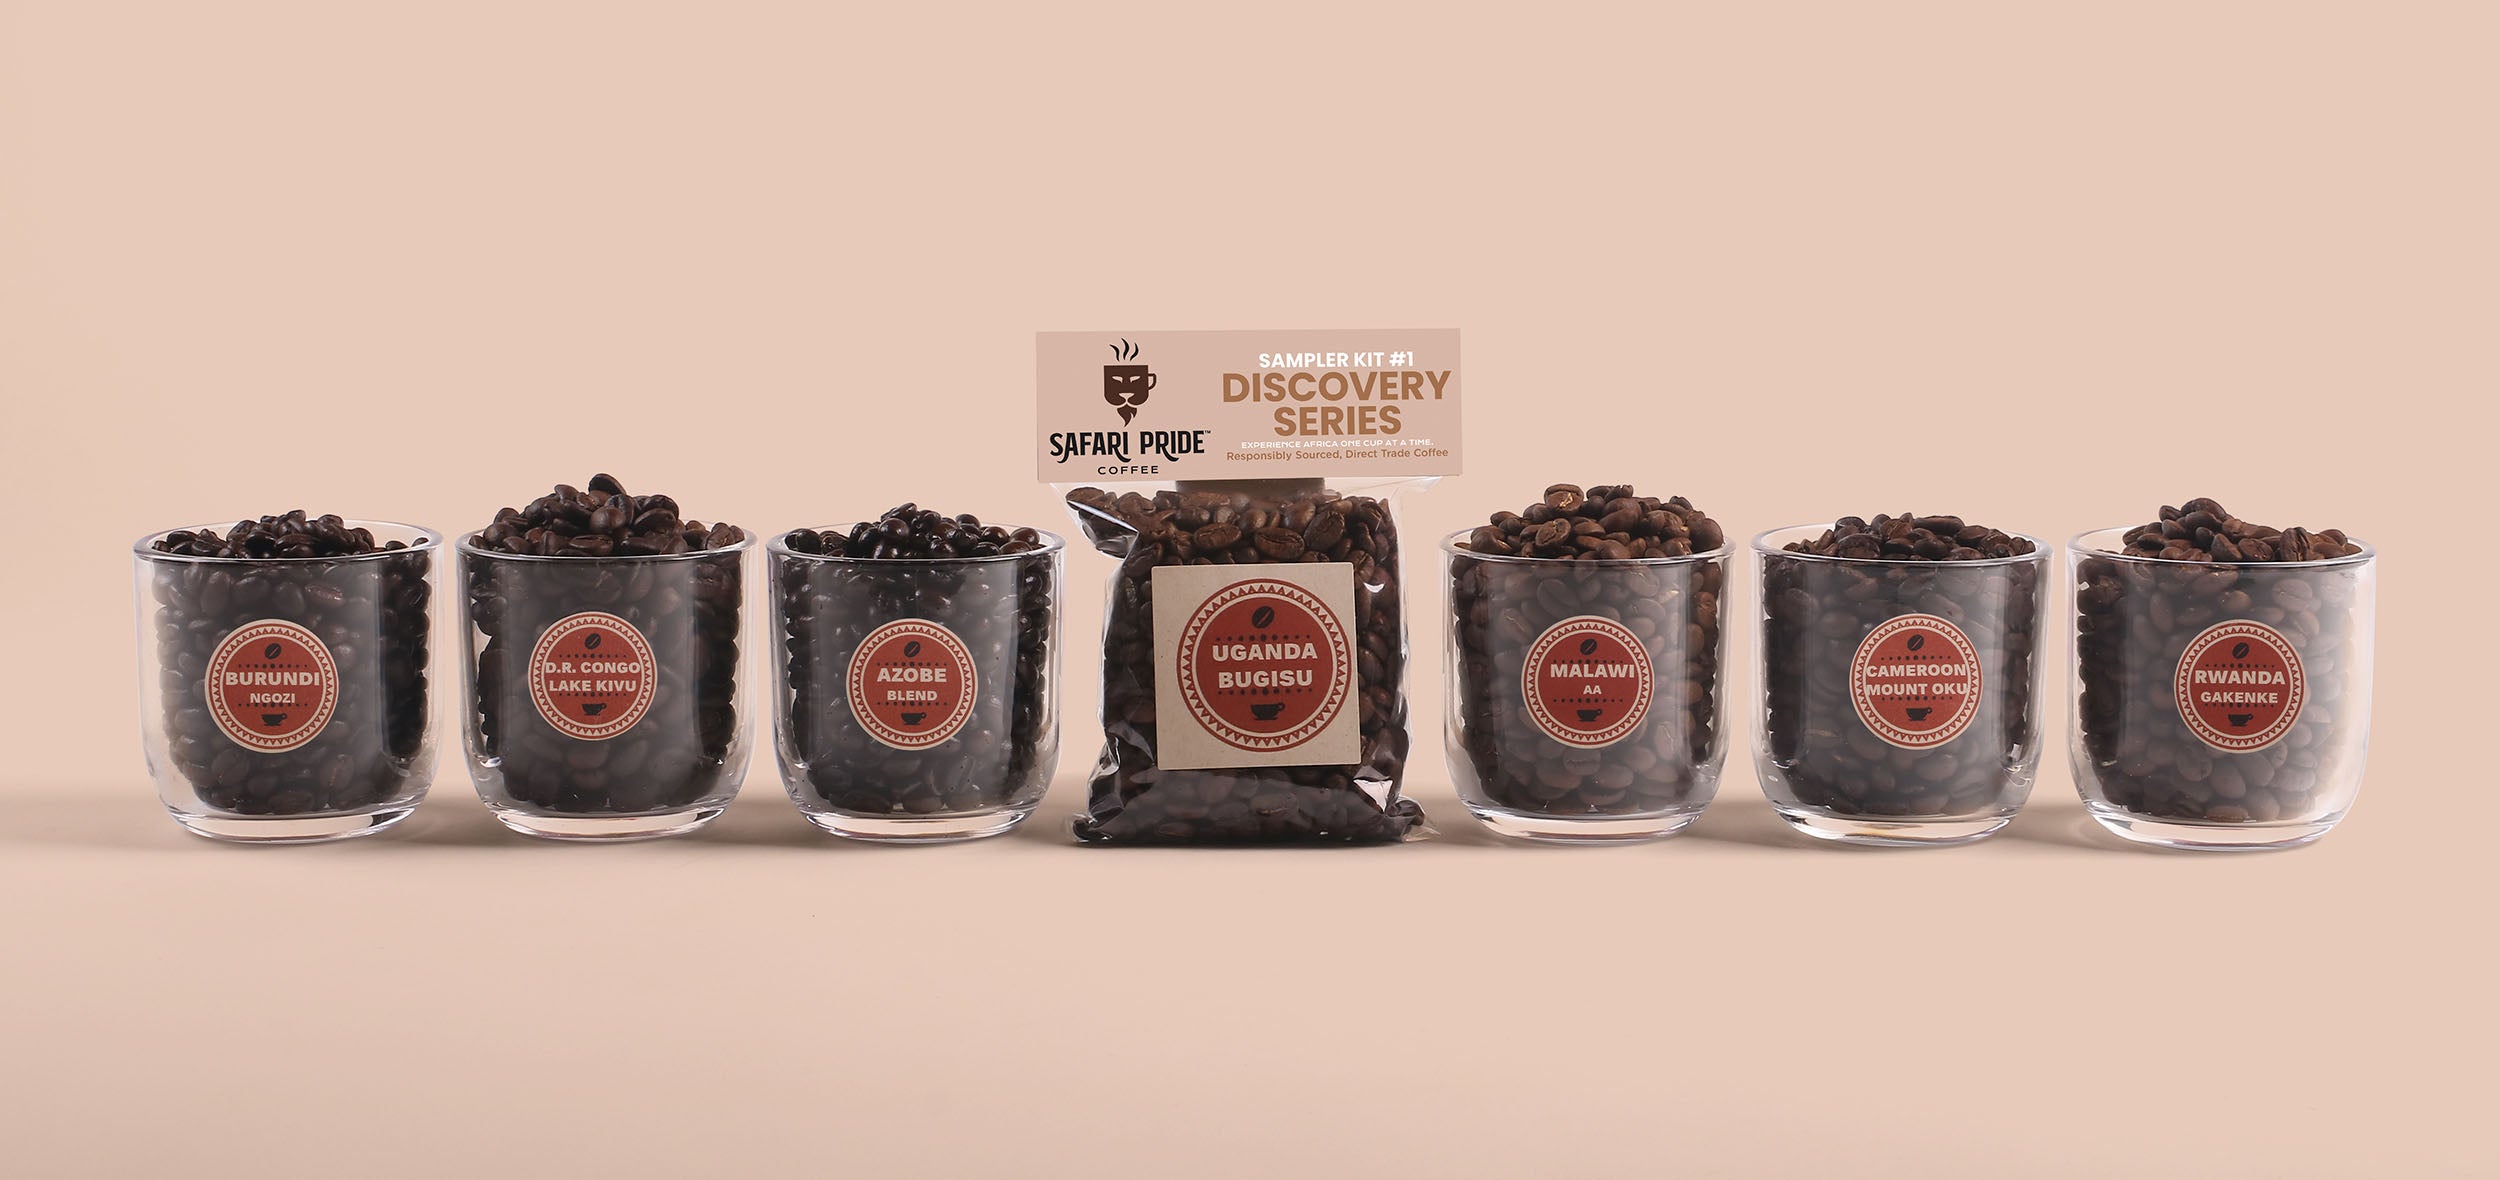 SAMPLE KIT #1: DISCOVERY SERIES